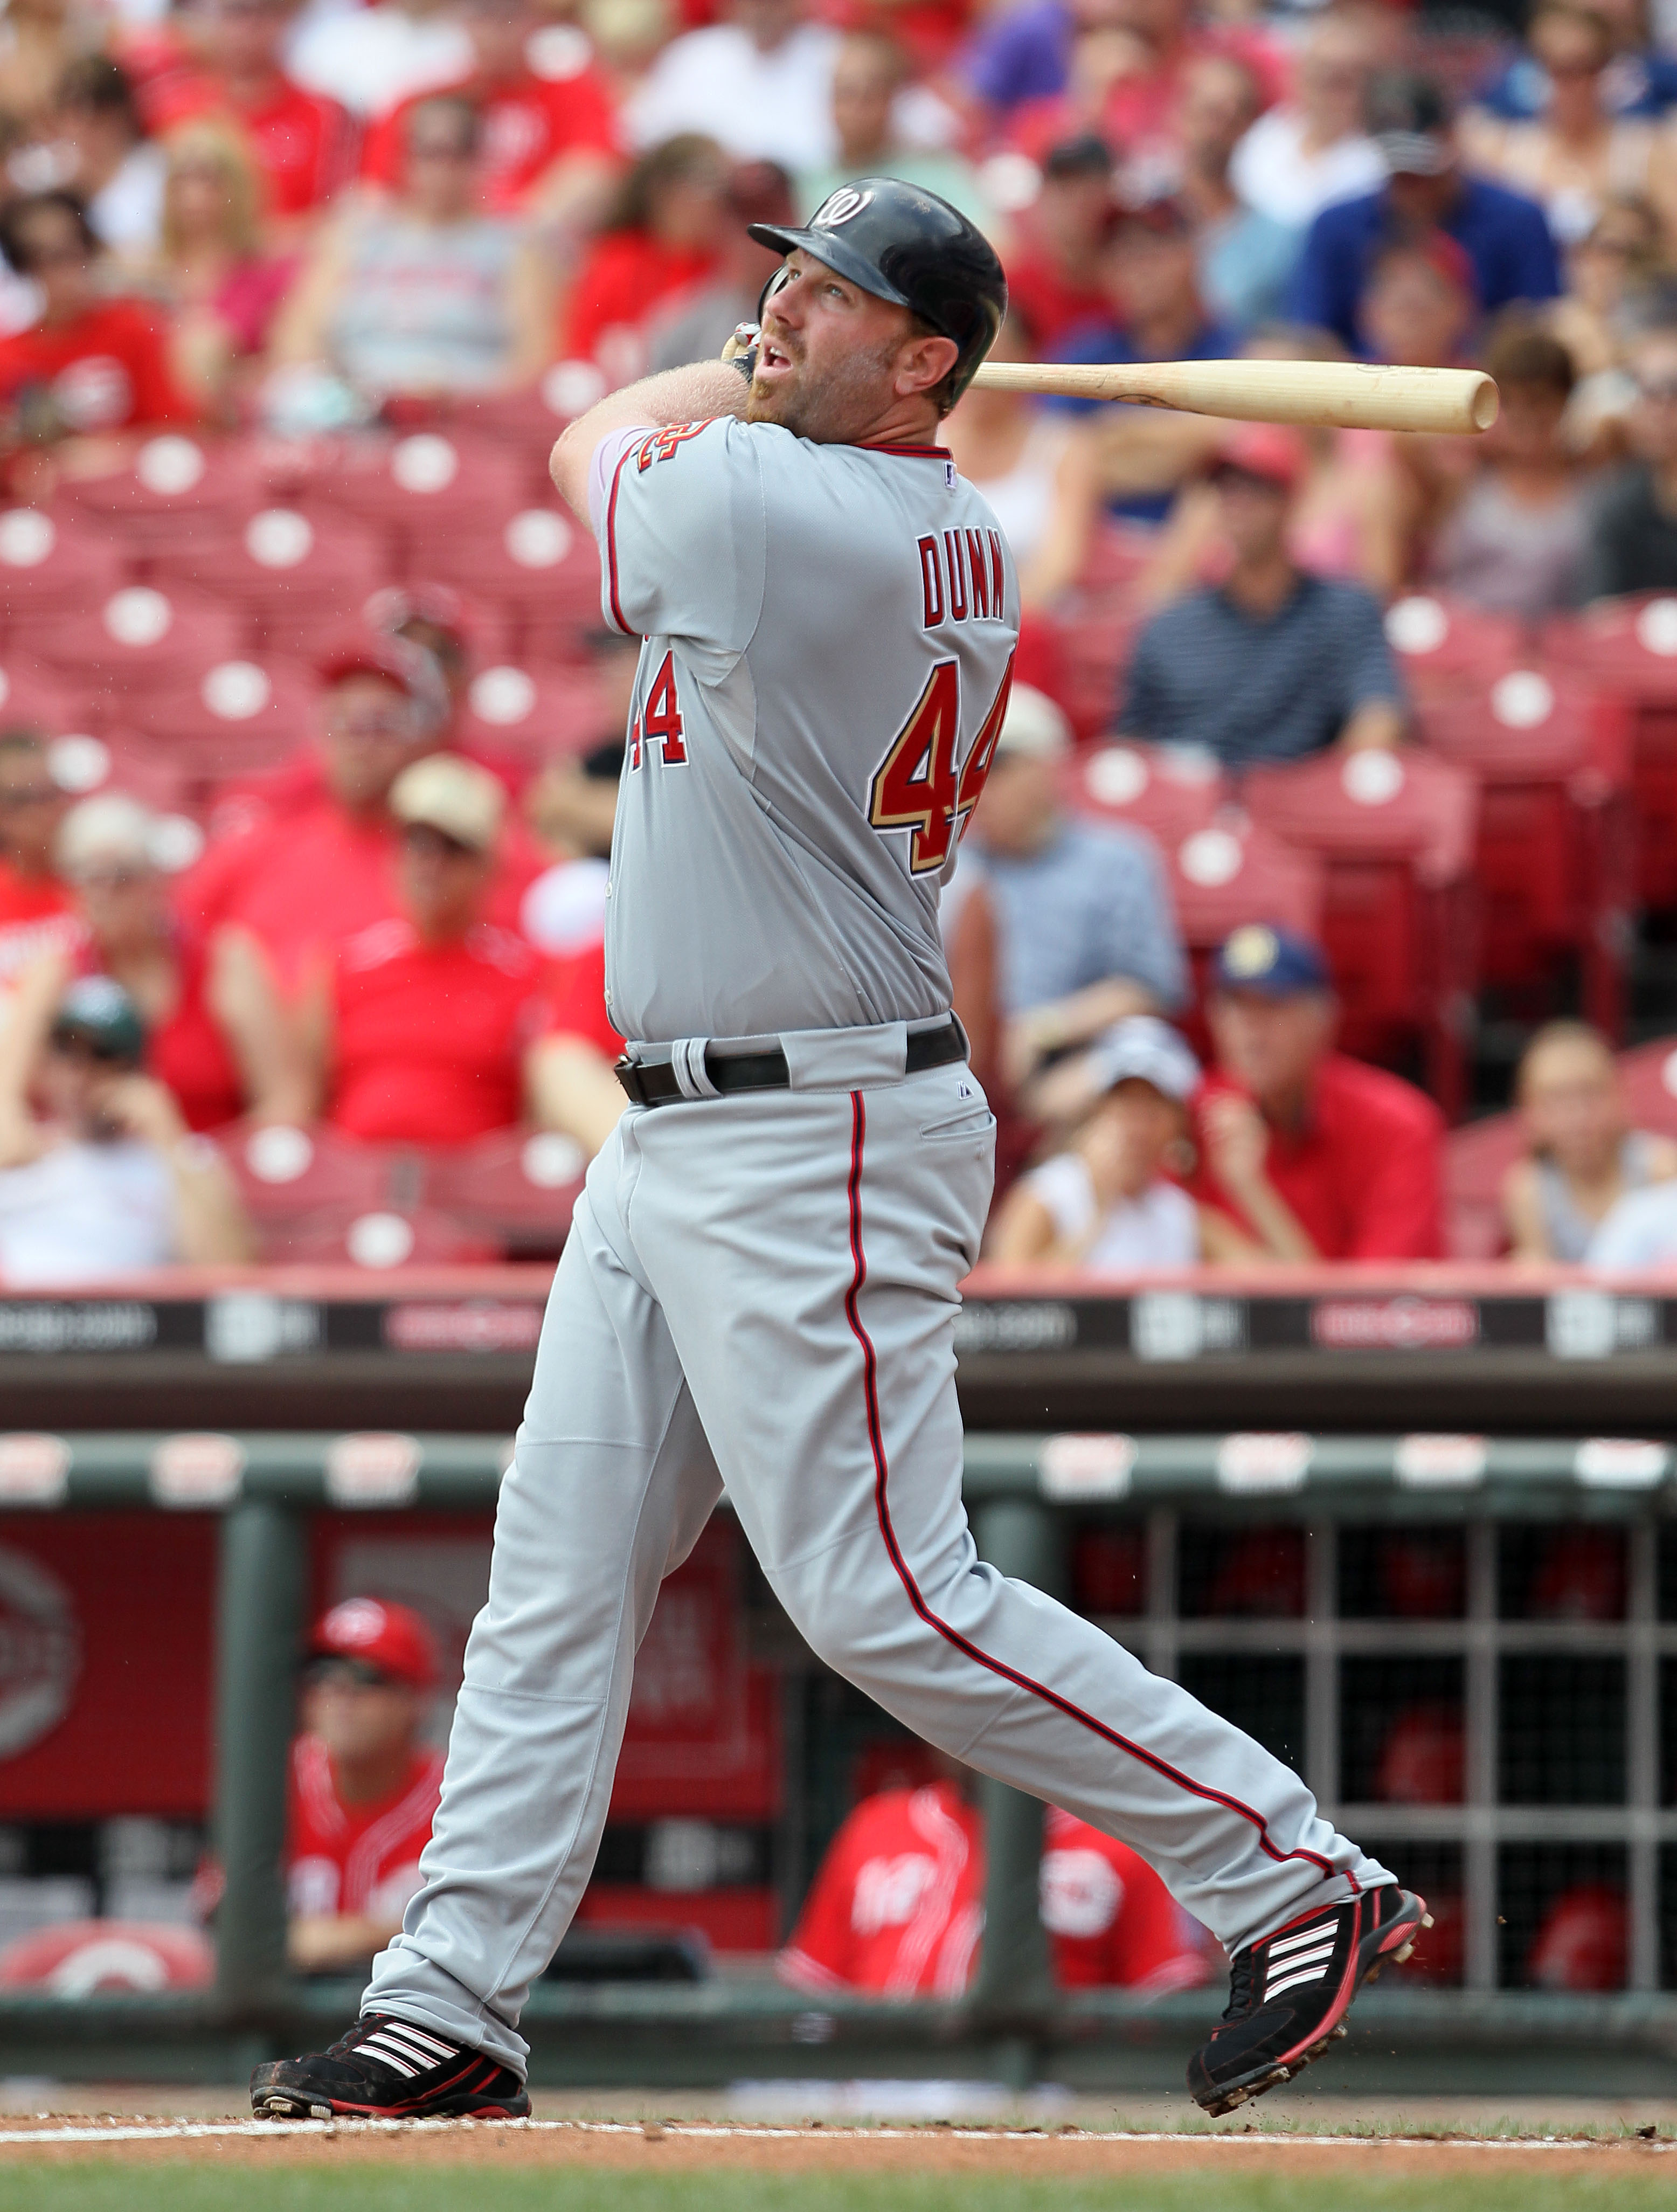 CINCINNATI - JULY 22:  Adam Dunn #44 of the Washington Nationals hits a home run during the game against the Cincinnati Reds at Great American Ball Park on July 22, 2010 in Cincinnati, Ohio.  (Photo by Andy Lyons/Getty Images)